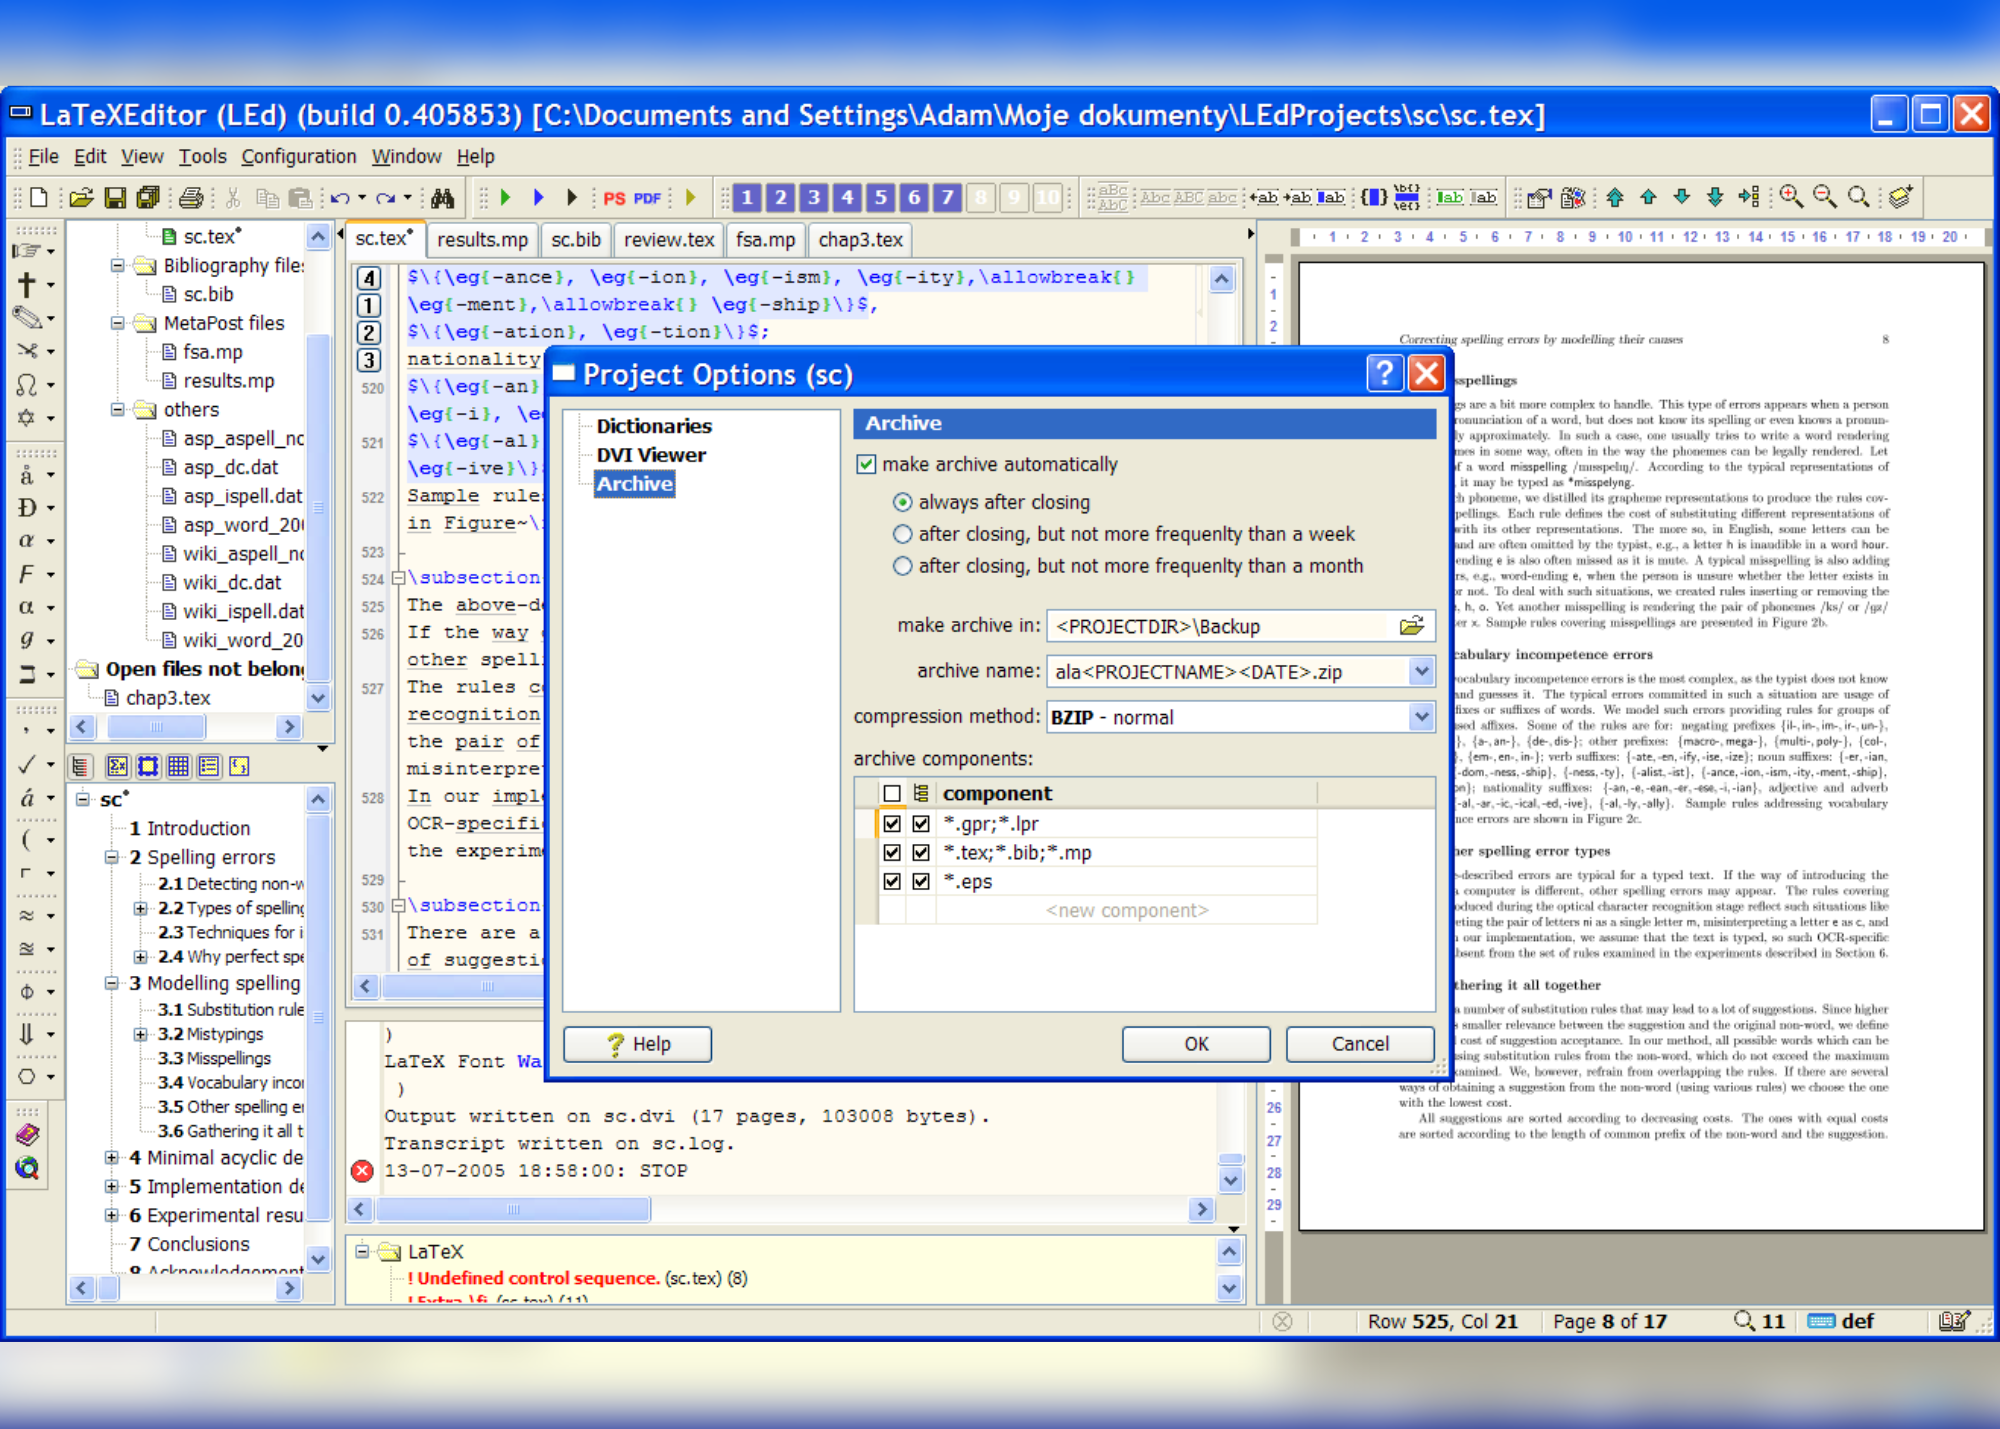 A screenshot showing automatic archiving